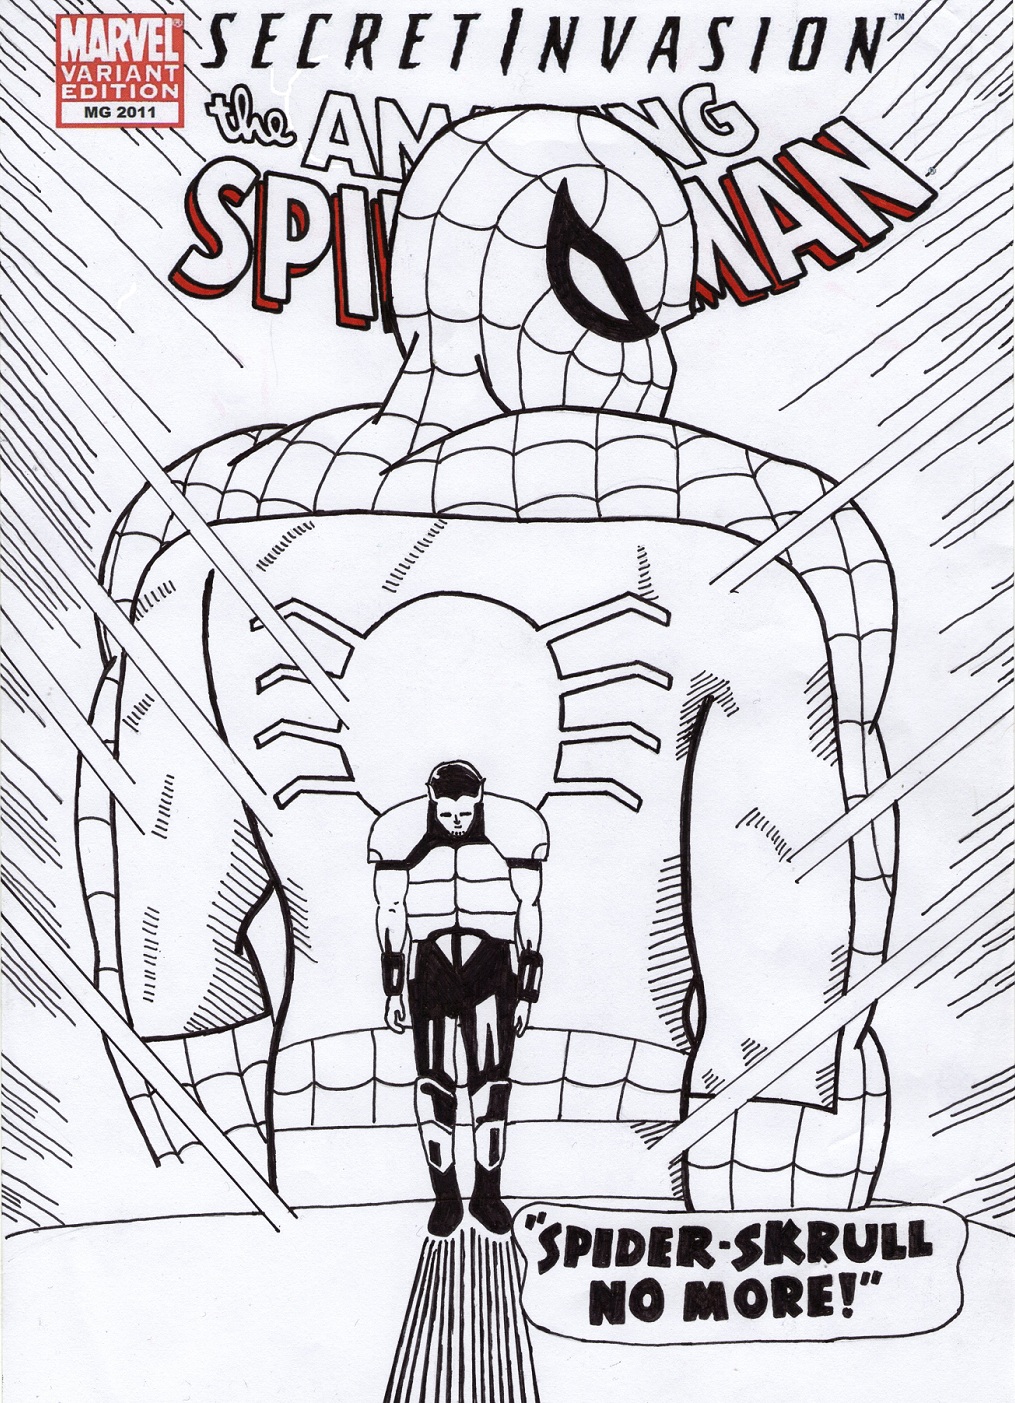 Spider-Skrull cover version by manakinjax79